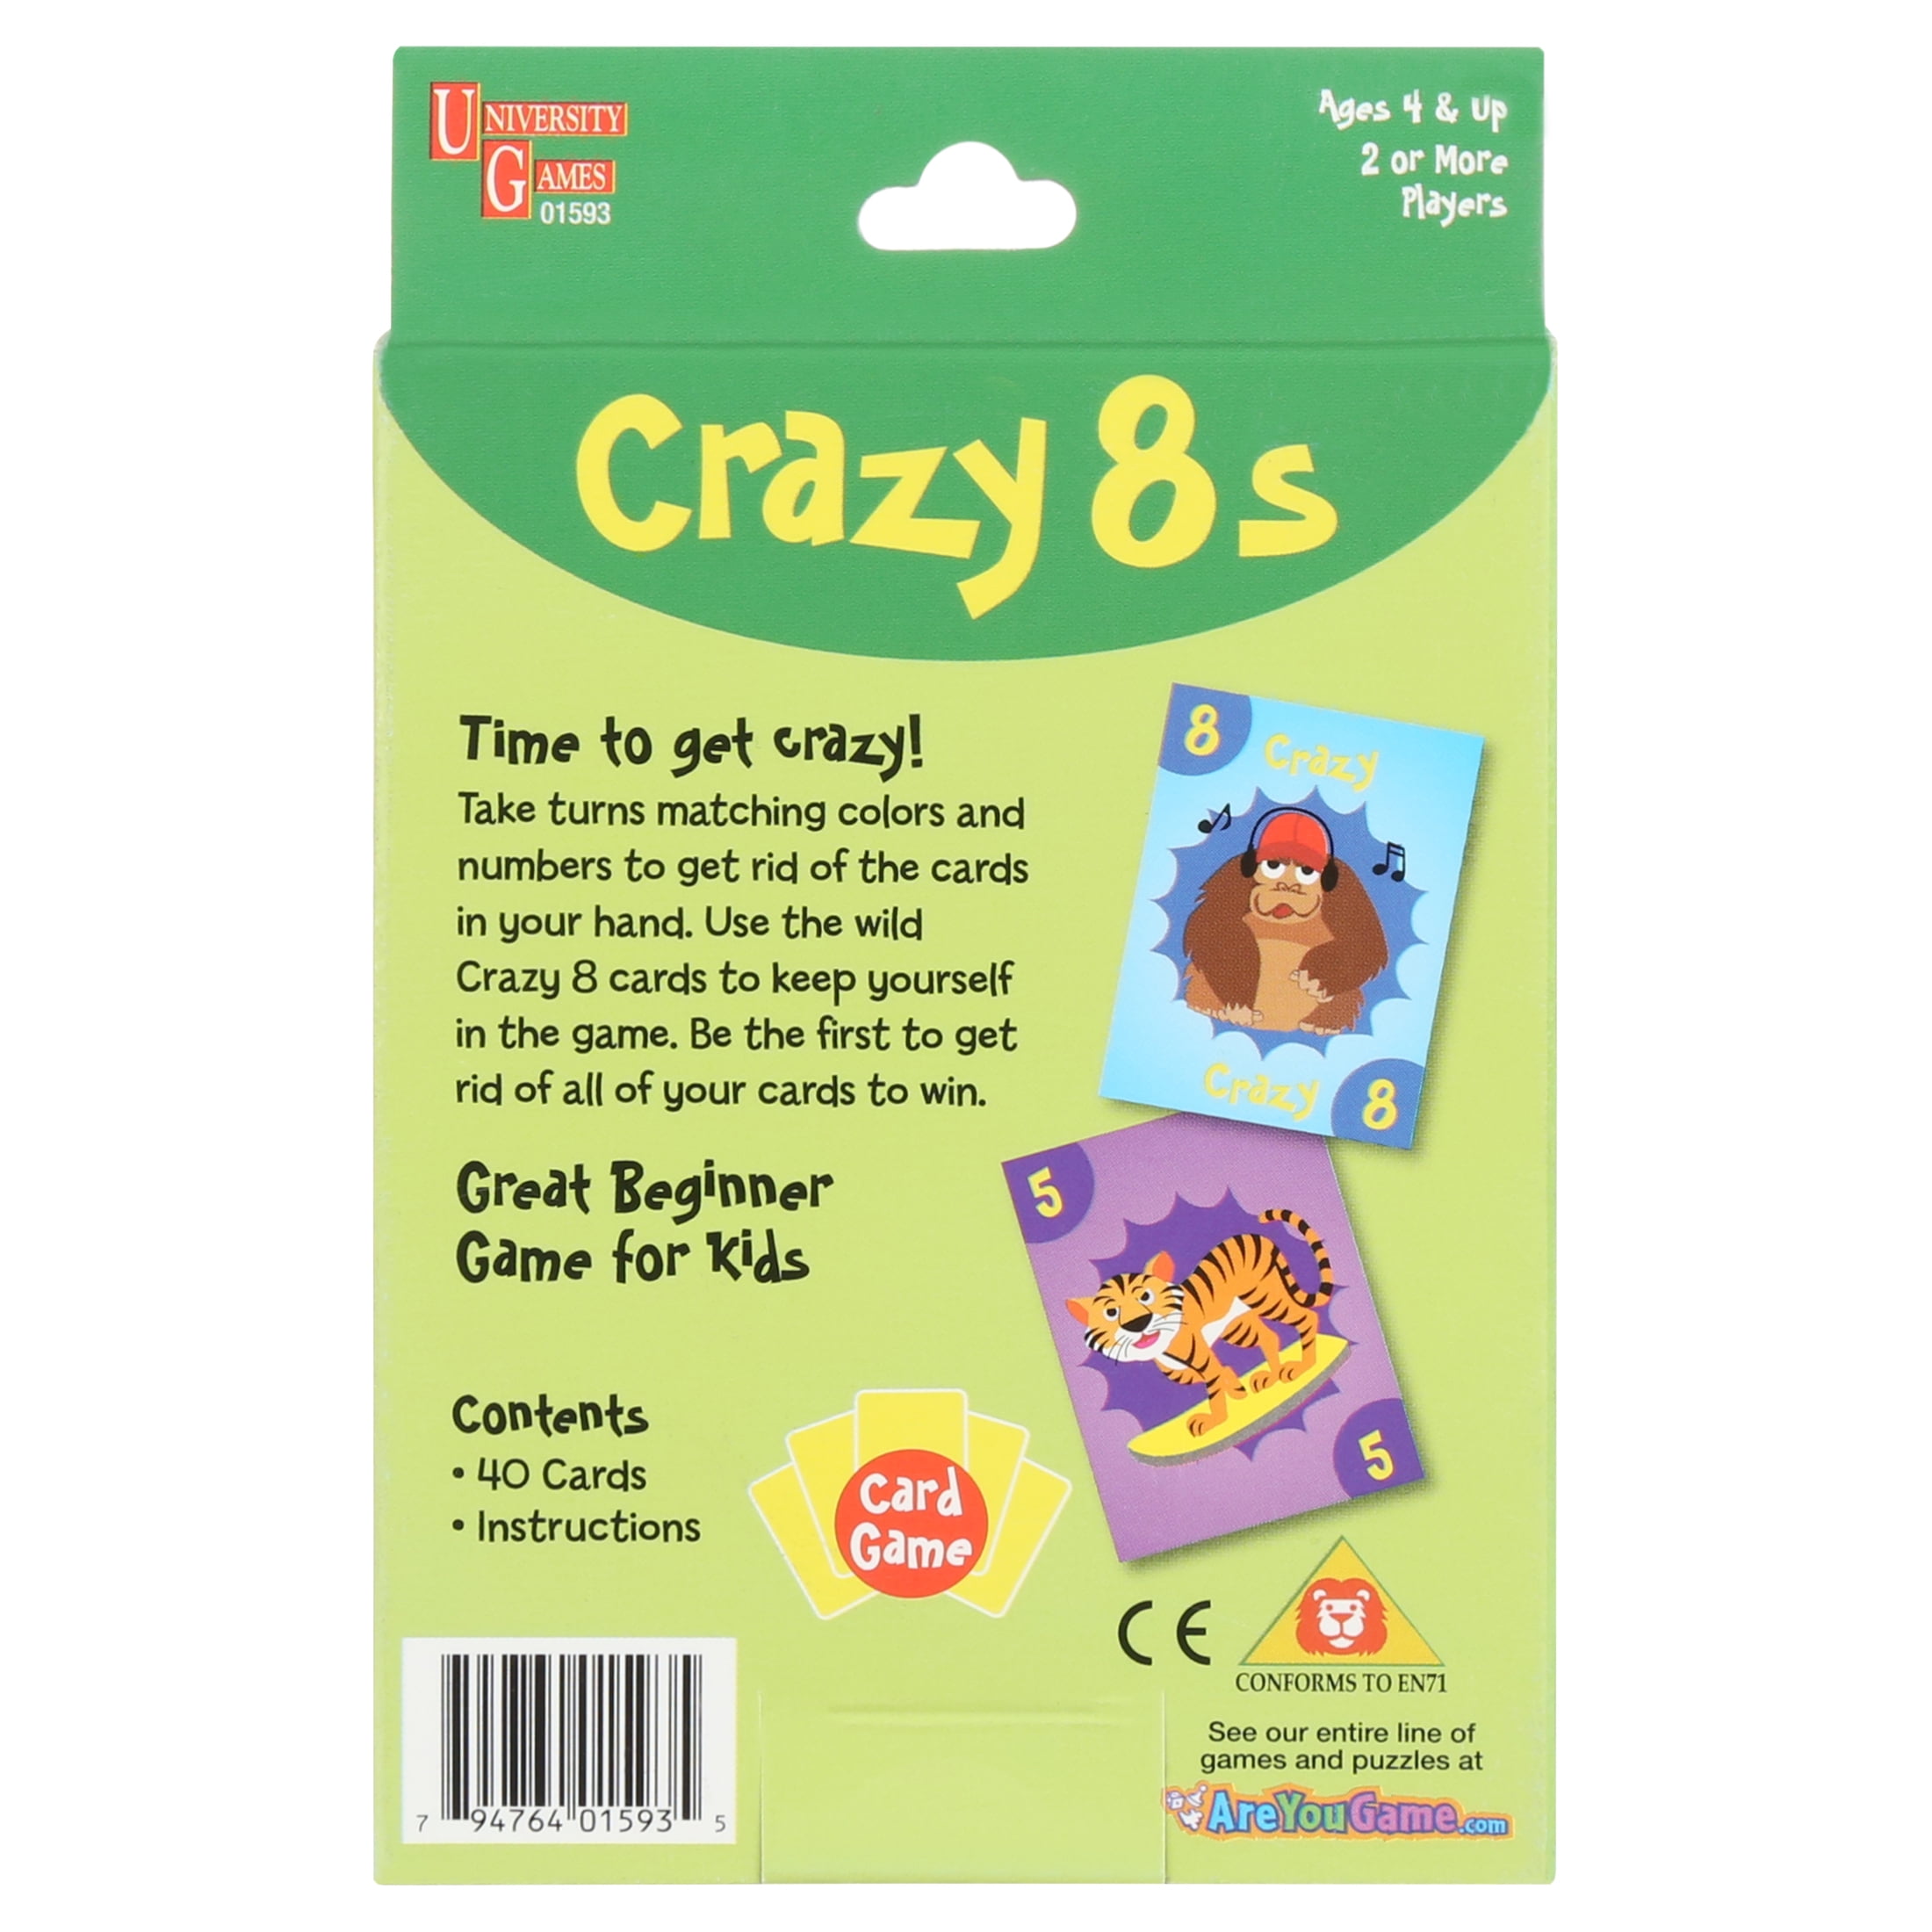 Fun a Ton Crazy 8's Card Game for Kids - The Game of Crazy 80s Kids Game  Toy - Colorful Design - Great for Children Ages 6 & Up. Cards Size 4.7 x